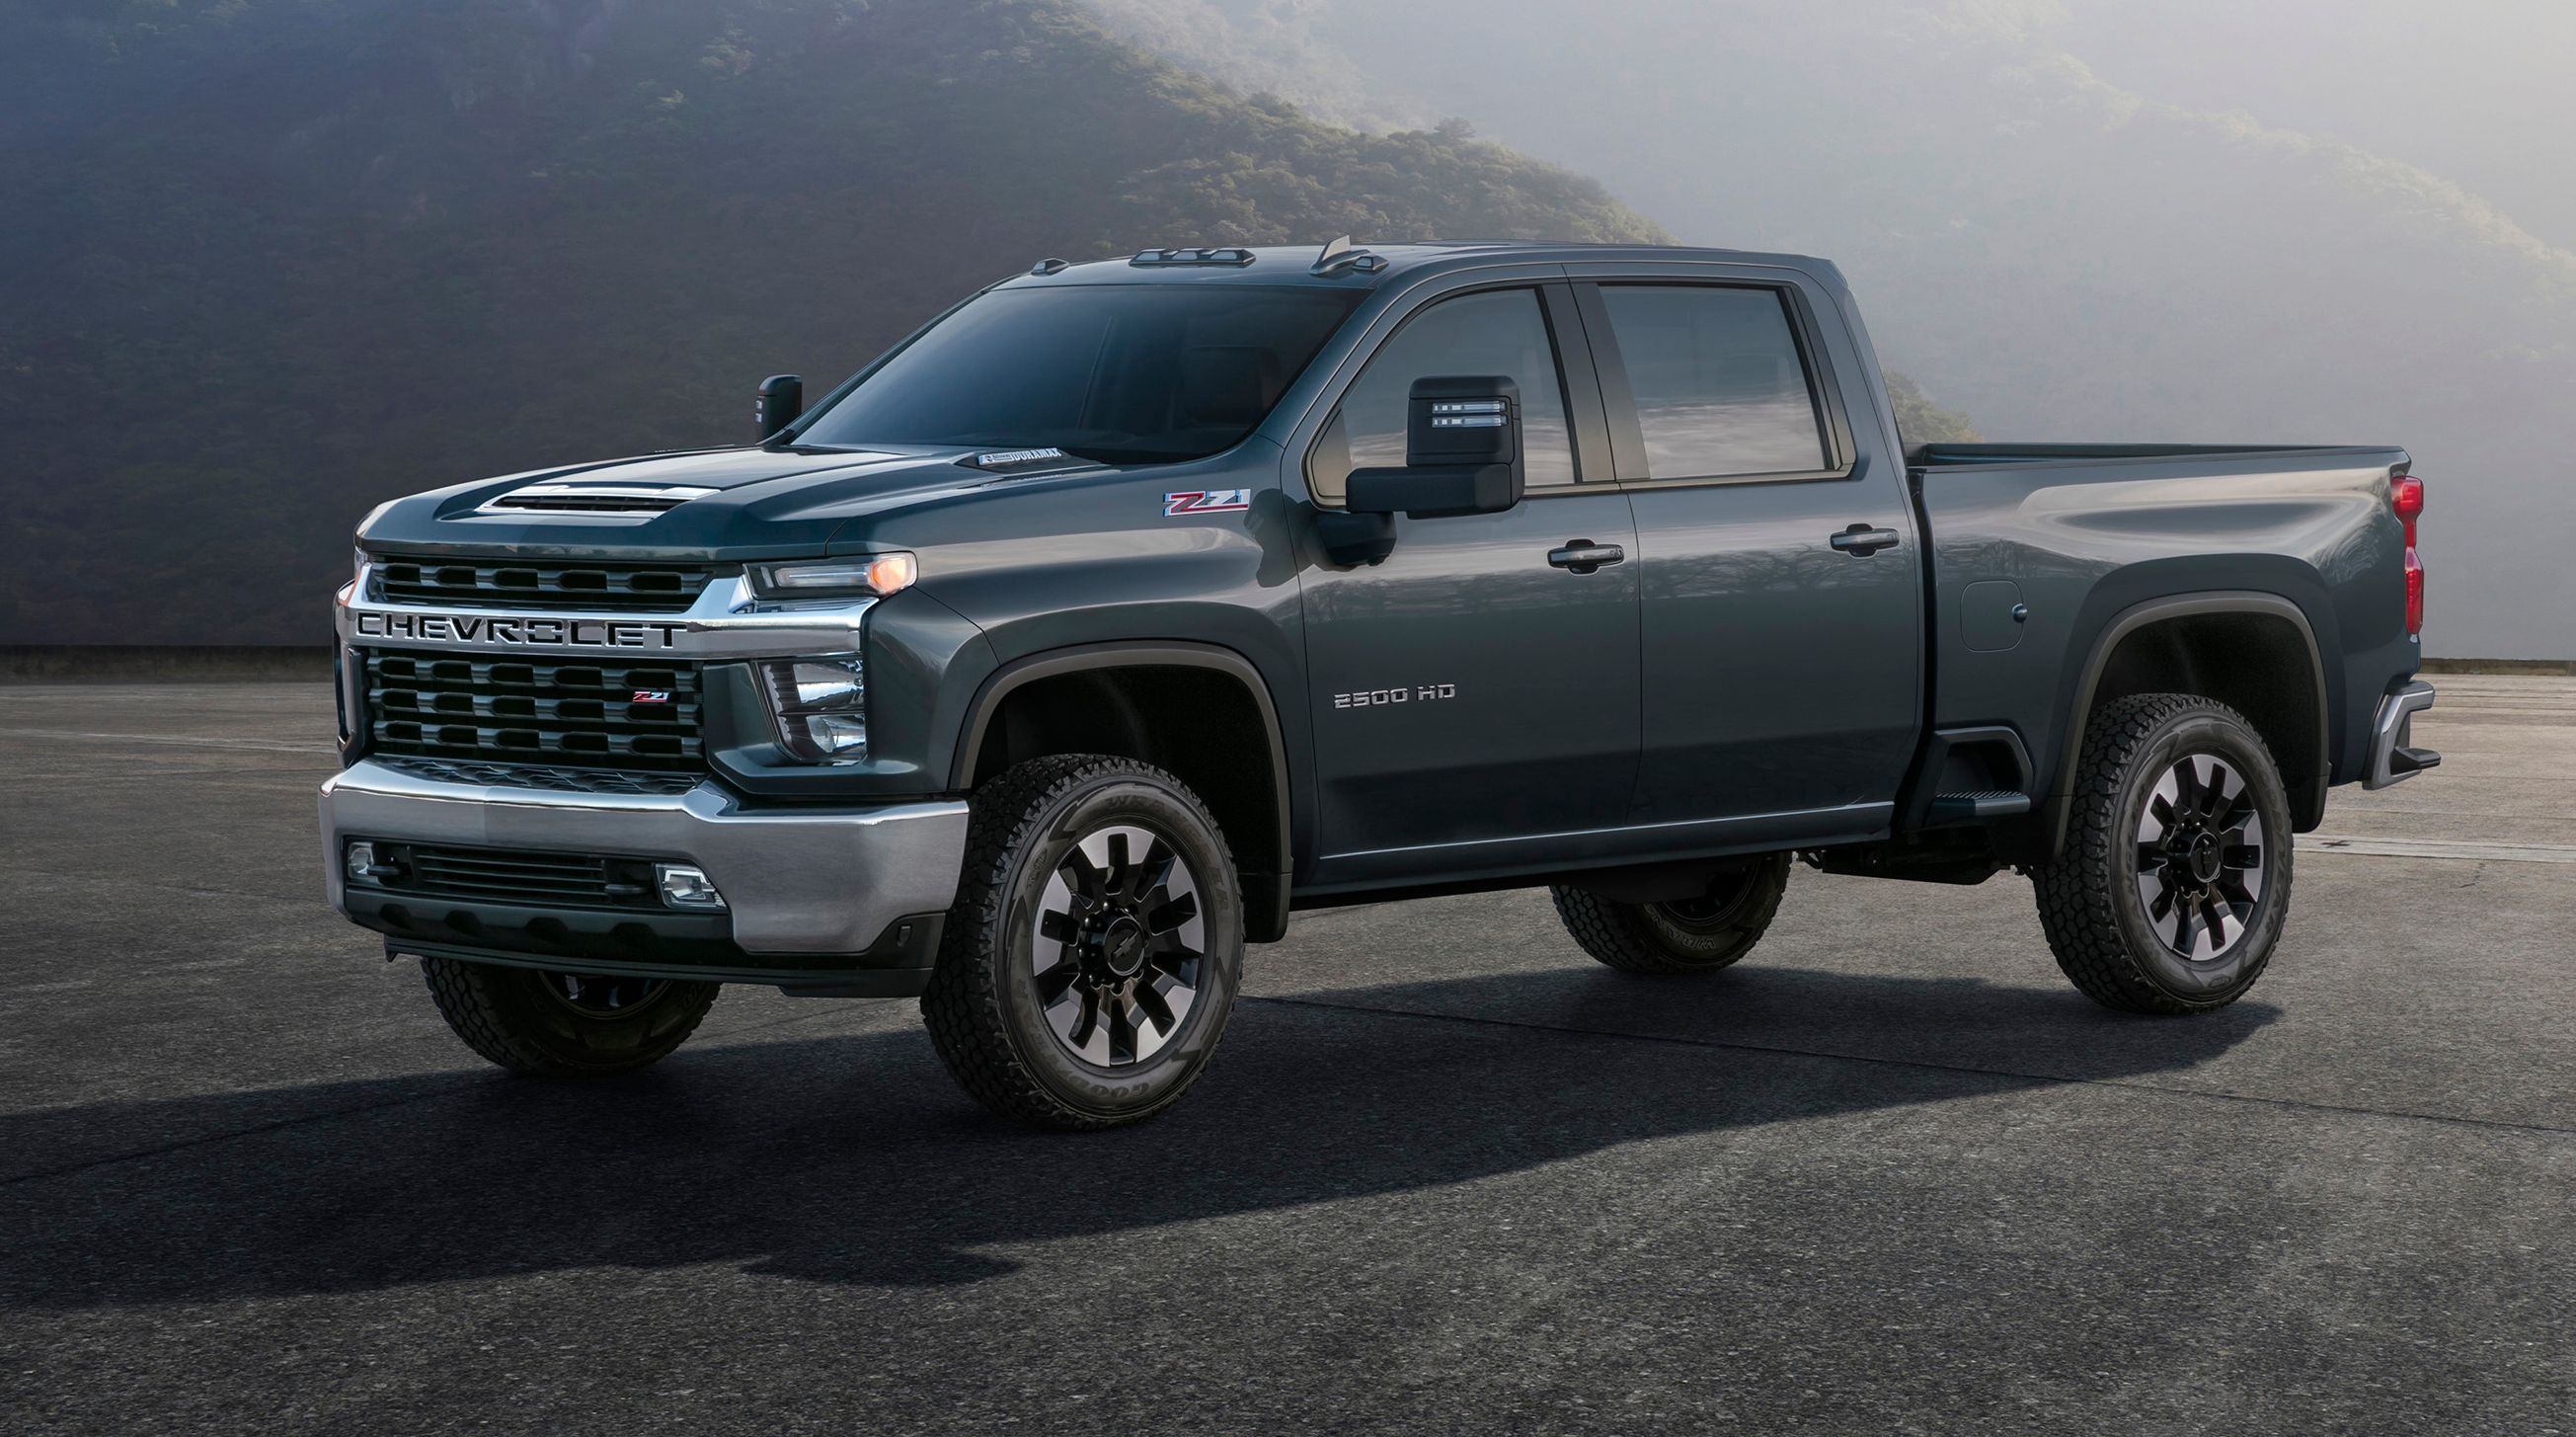 2020 14 Things You Have to Know about the 2020 Chevrolet Silverado HD